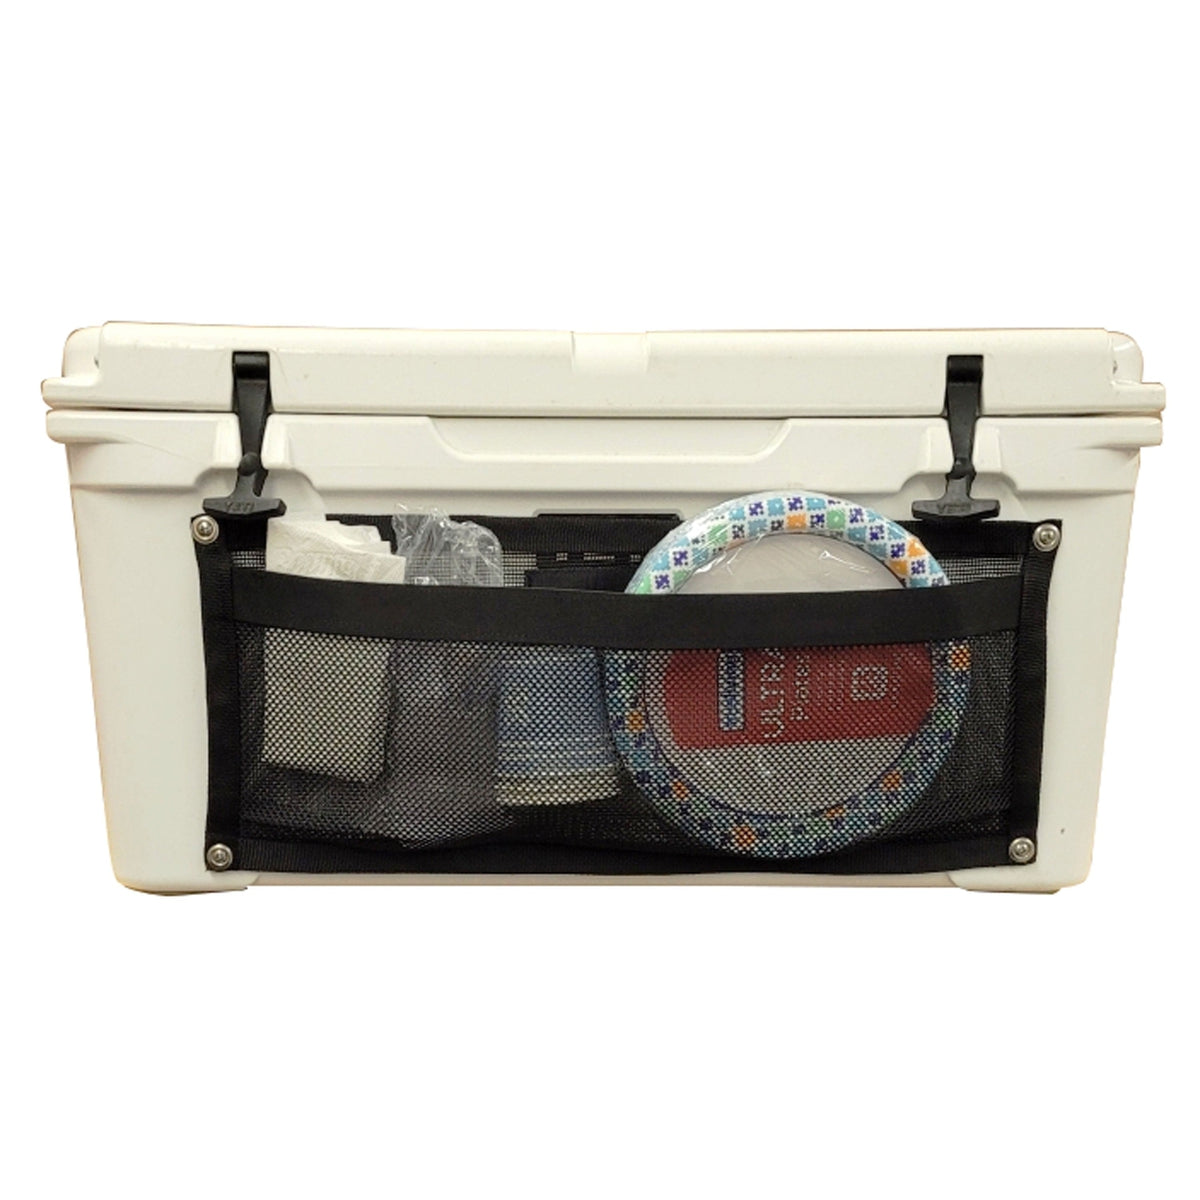 Rig Rite Qualifies for Free Shipping Rig Rite The Holdall Storage Pocket #1500